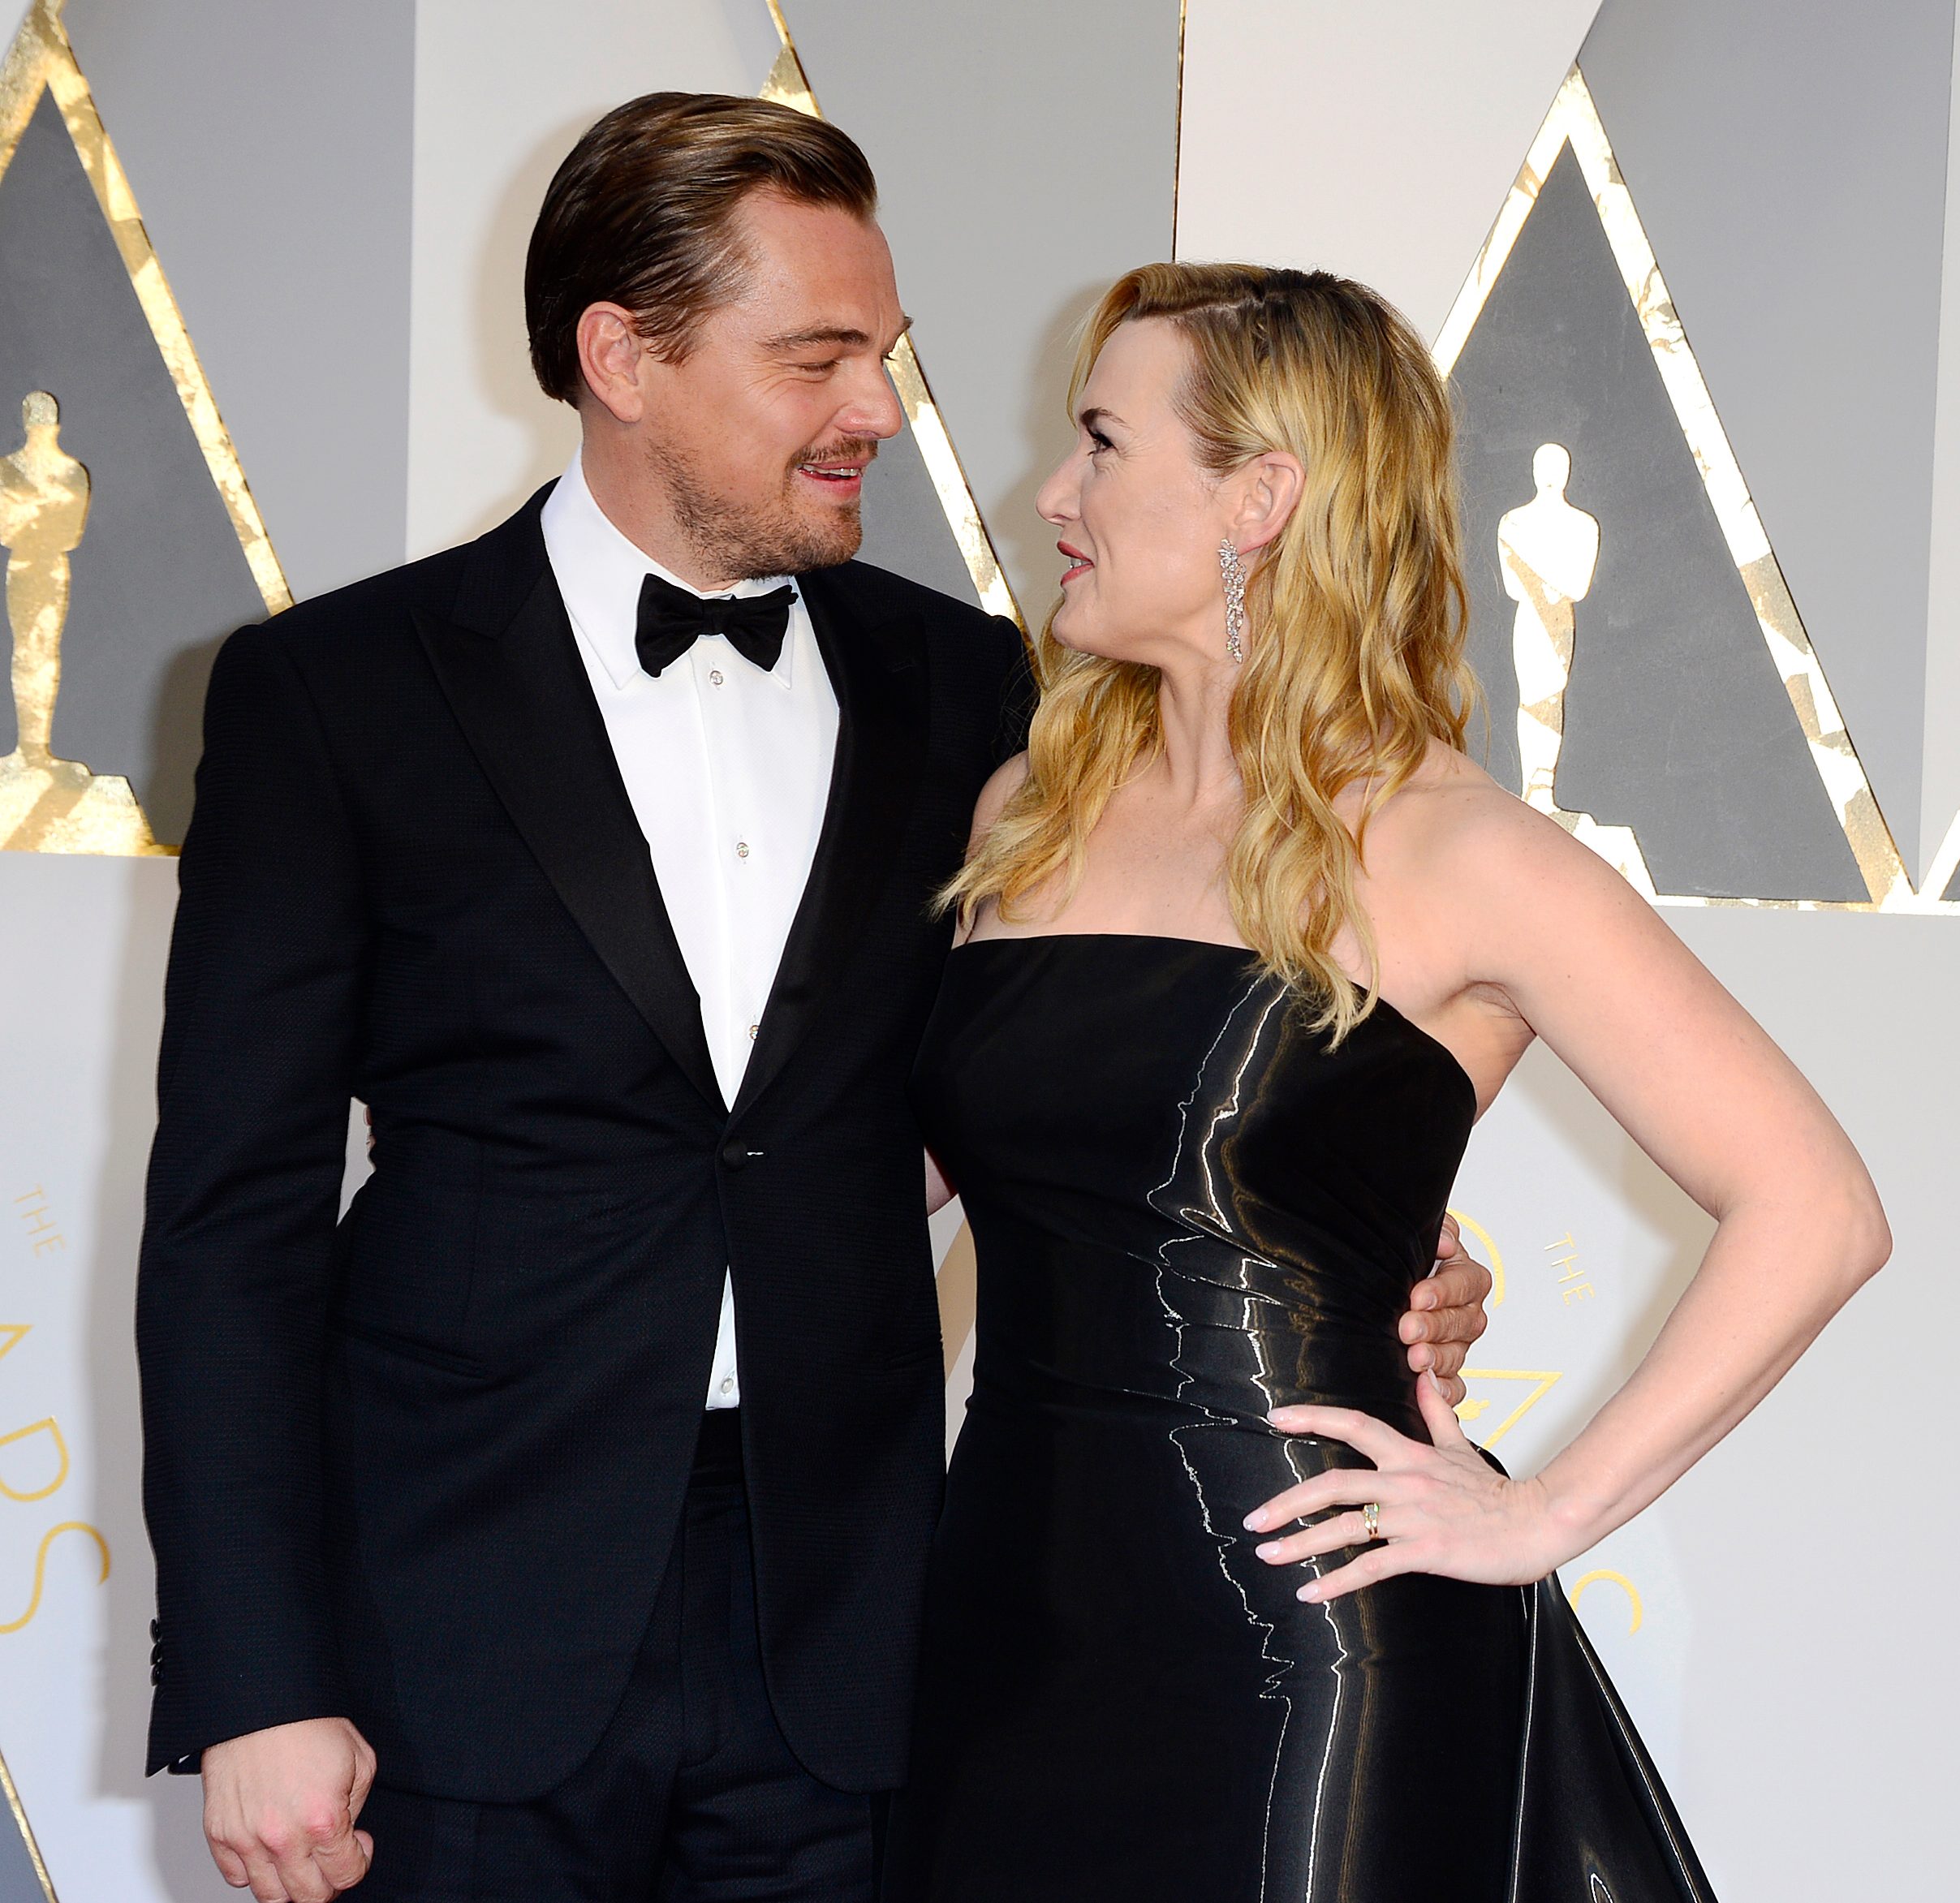 LOOK: Kate Winslet reacts to Leonardo DiCaprio’s Oscars win